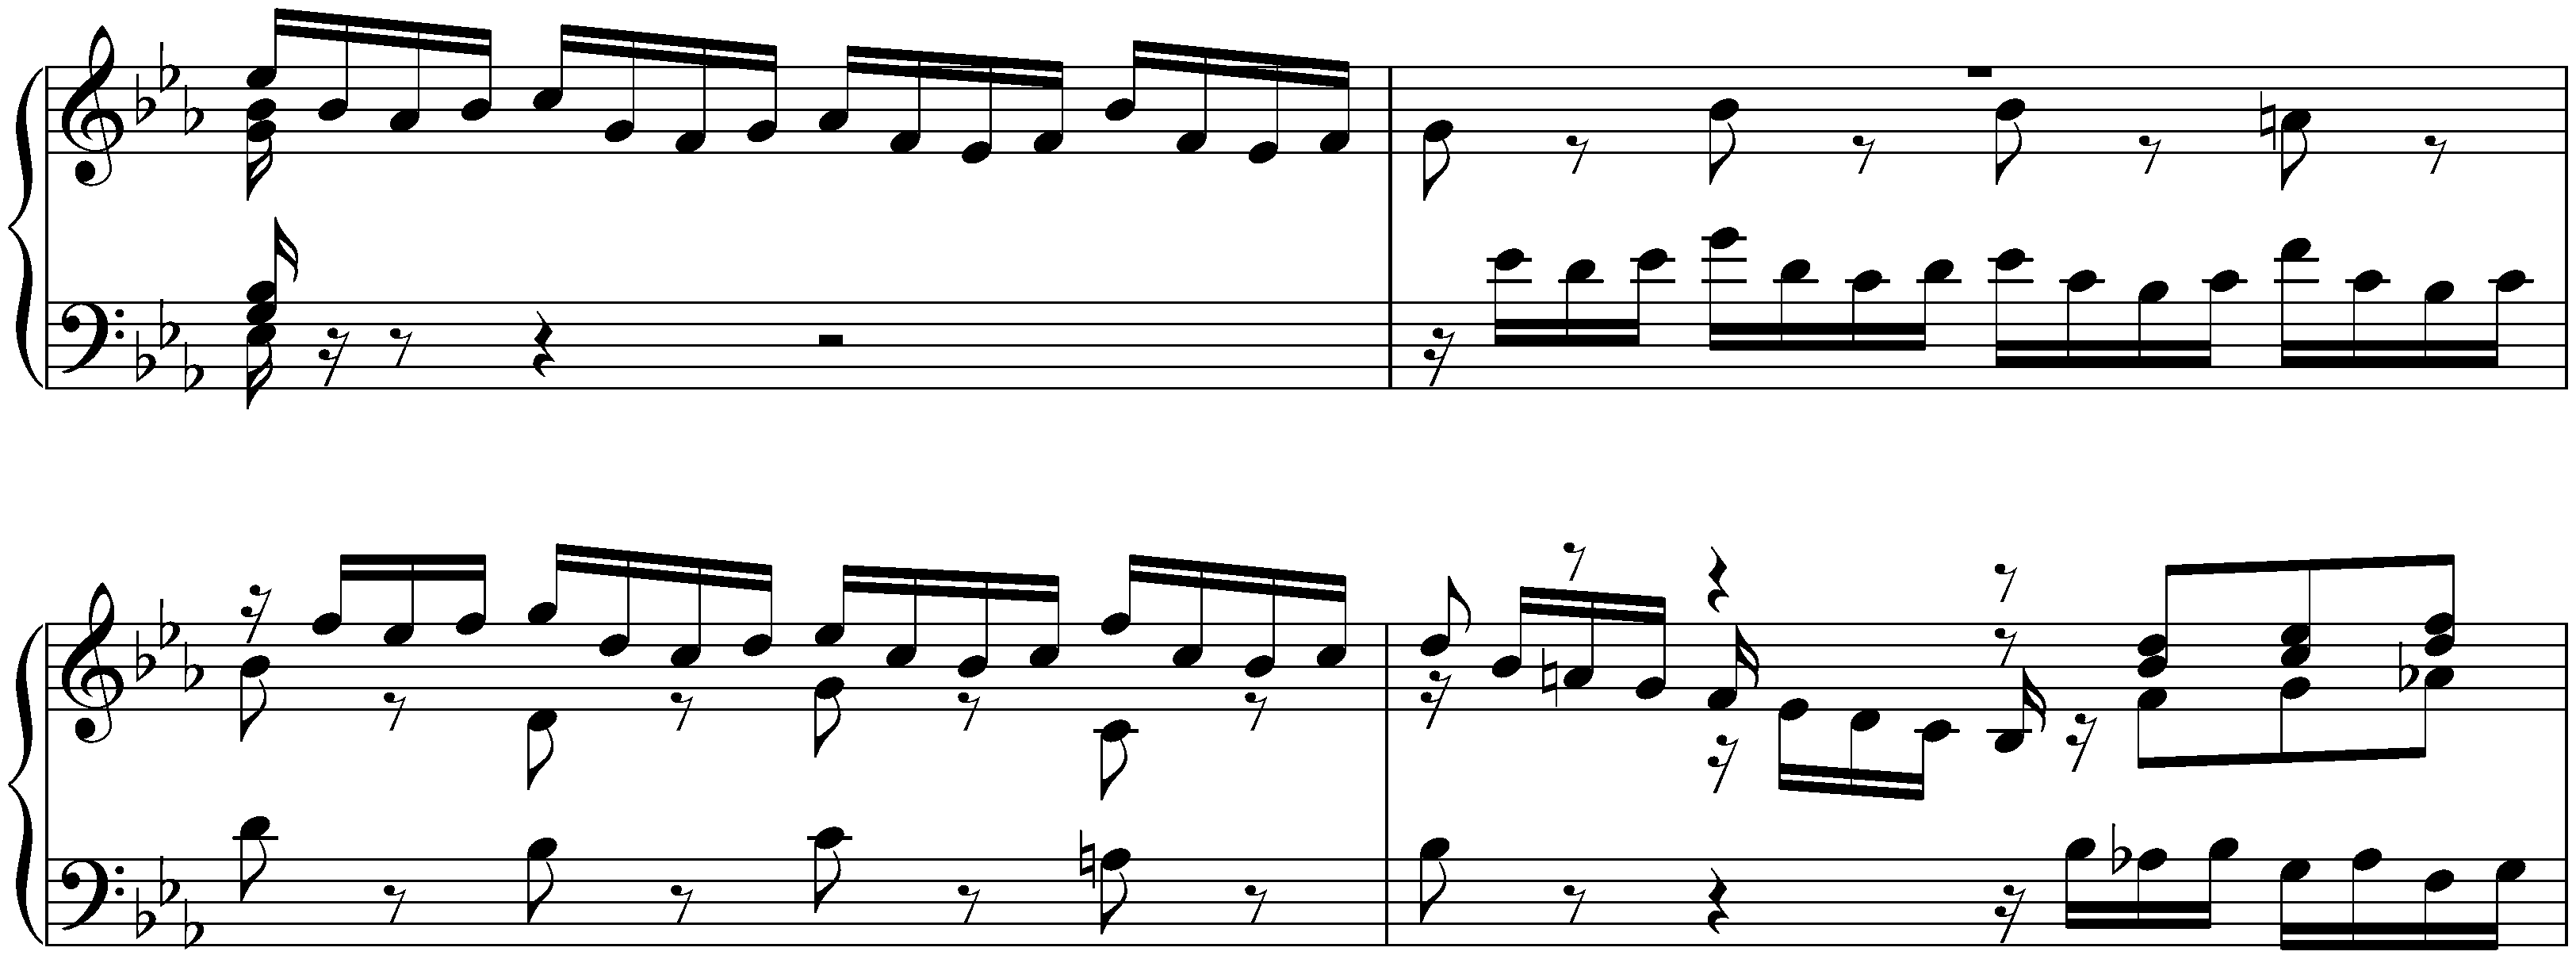 French Suite no. 4 in E-flat major, BWV 815; Praeludium (variant version)